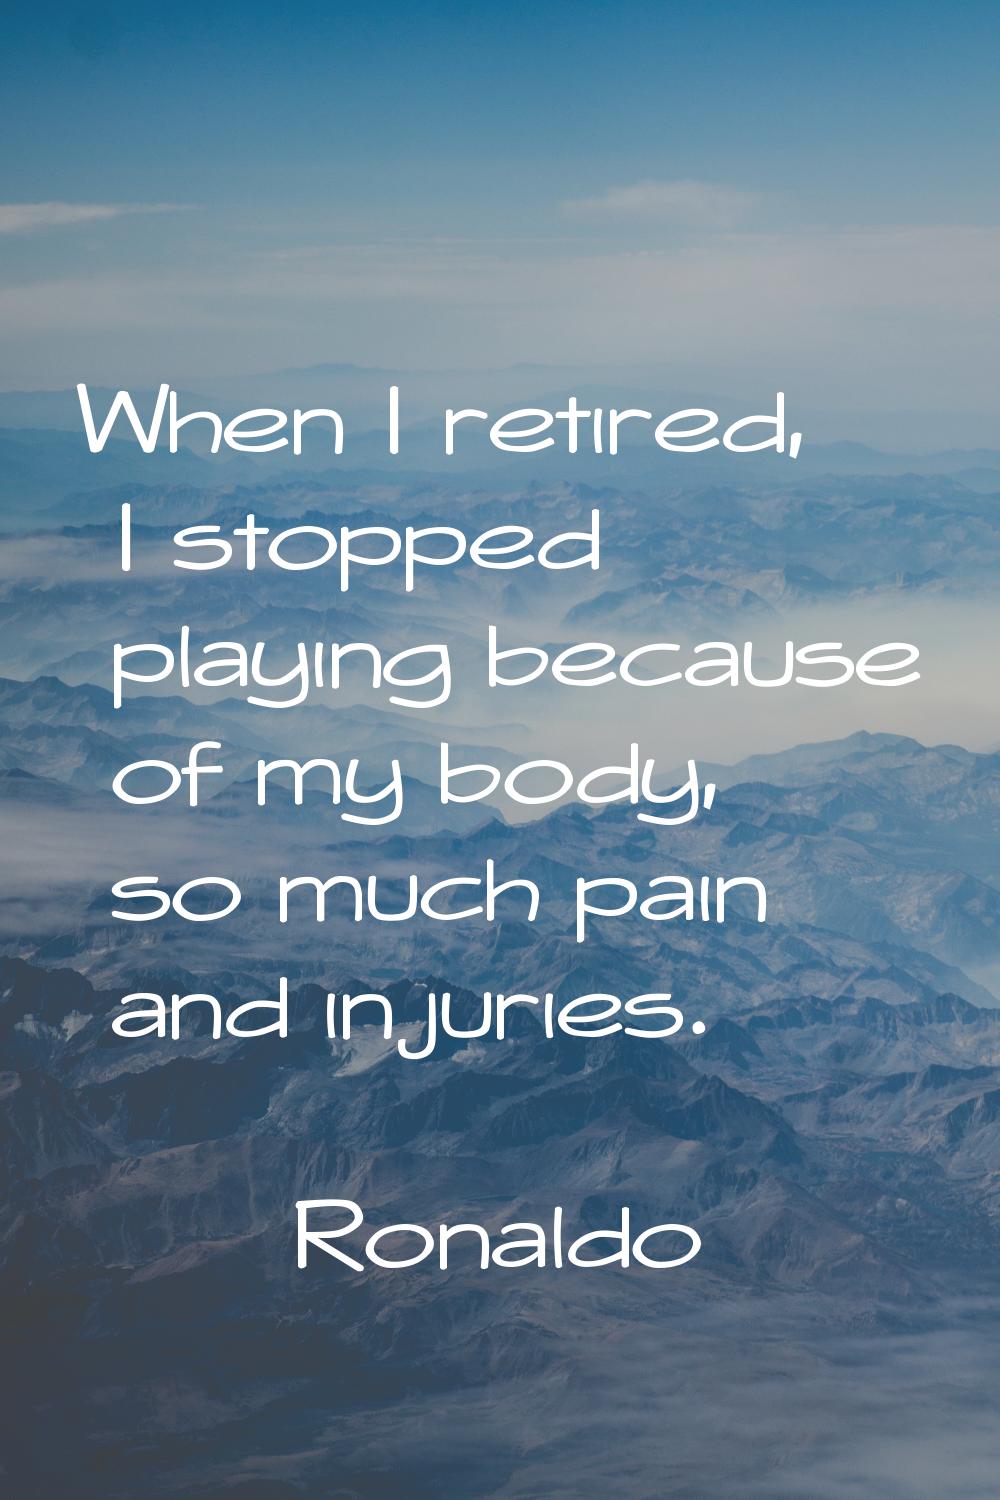 When I retired, I stopped playing because of my body, so much pain and injuries.